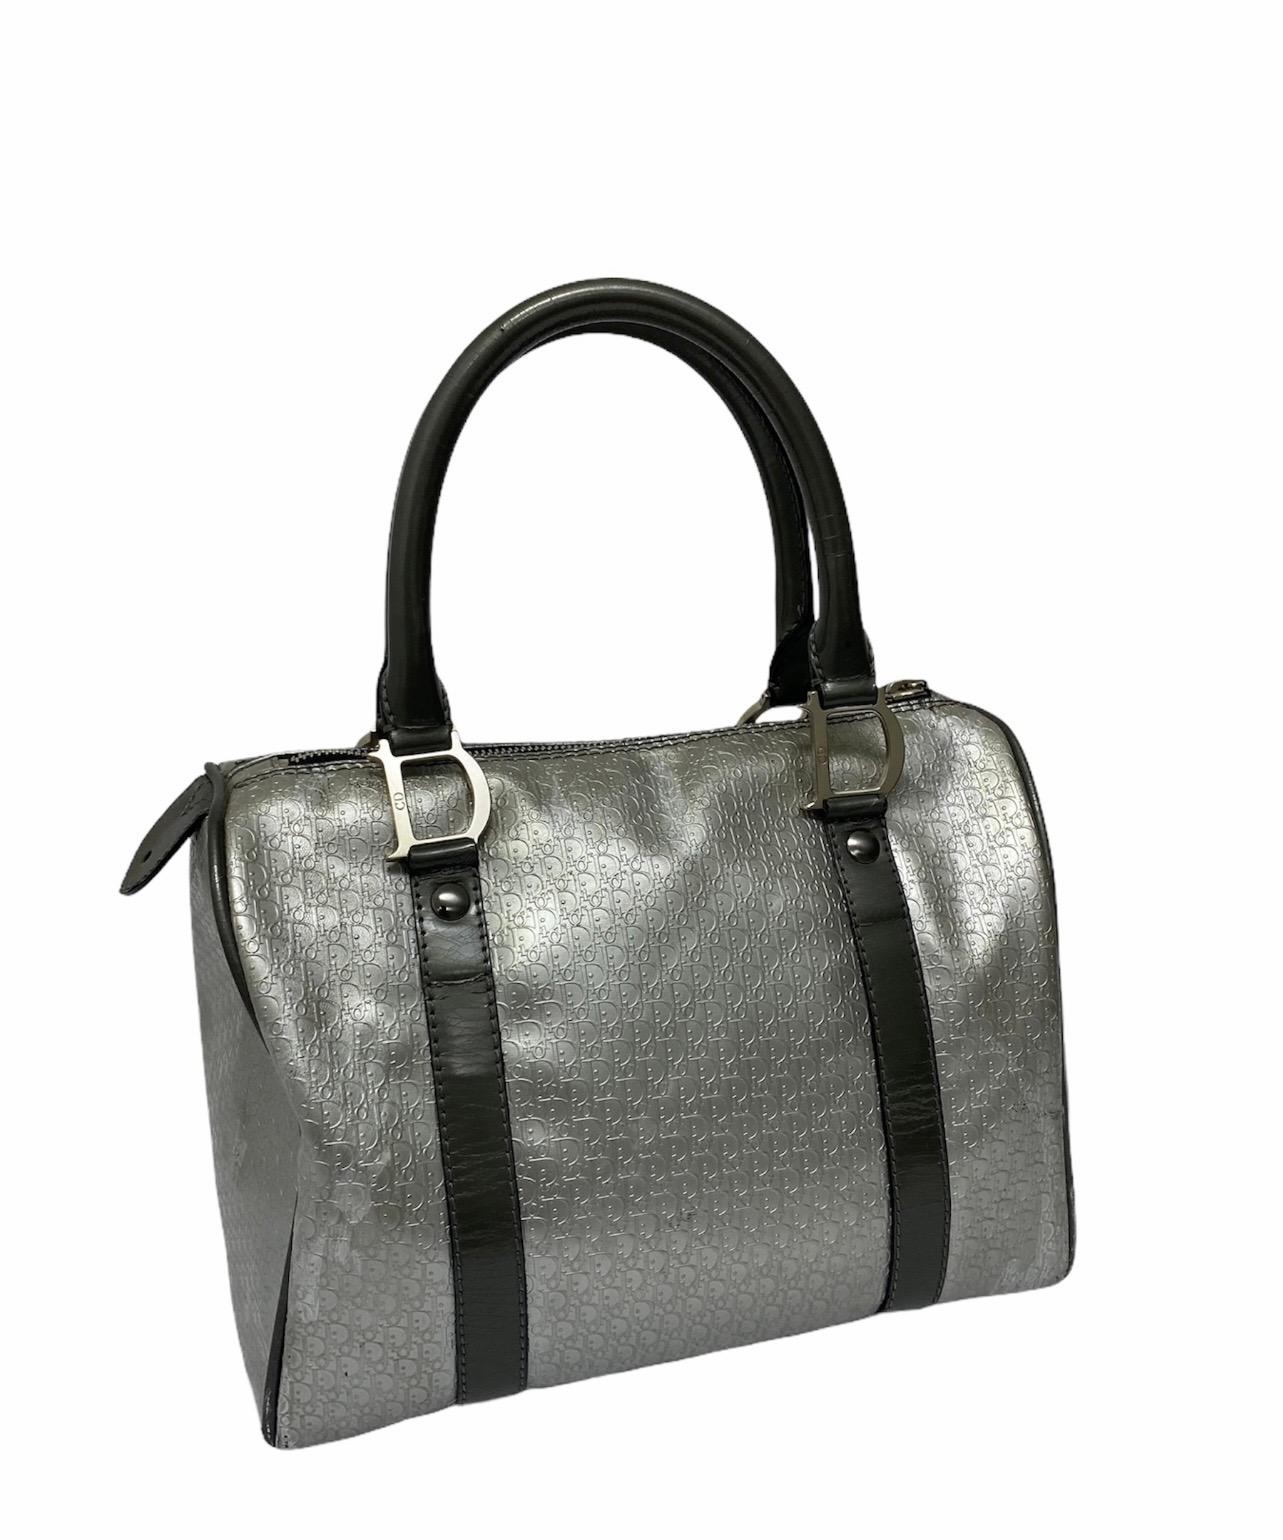 Women's Dior Silver Leather Bag